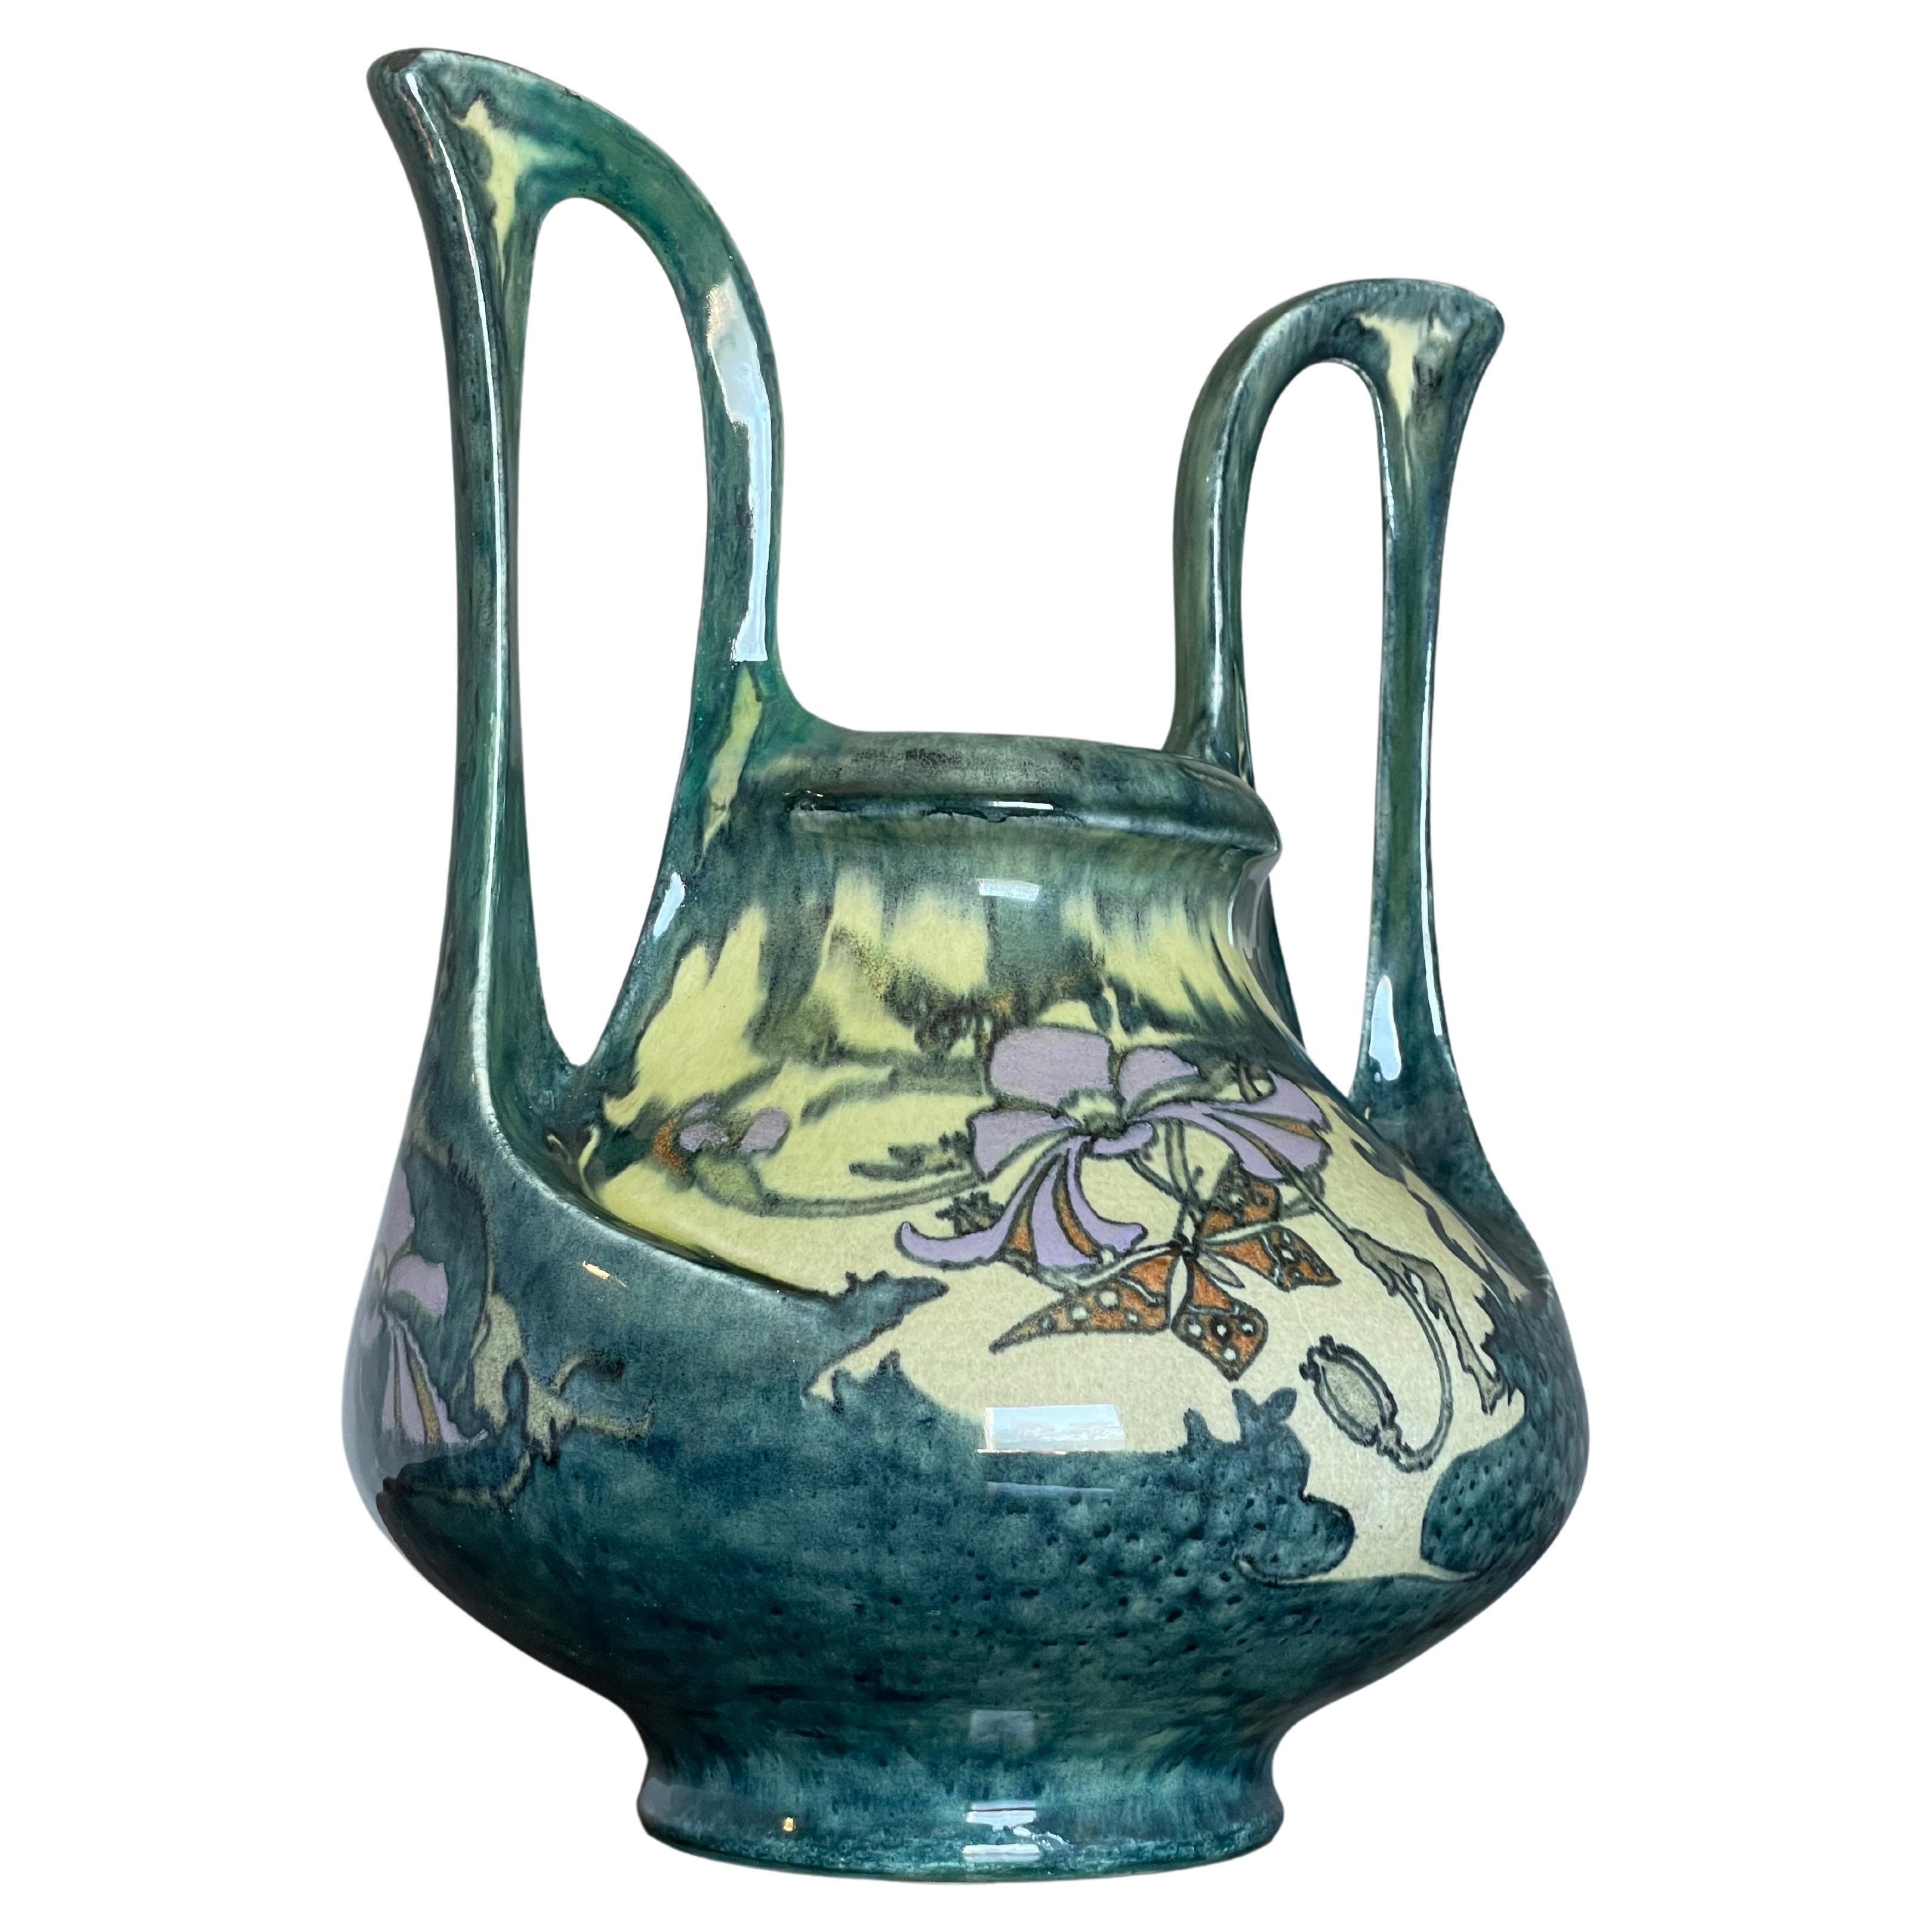 Stunning Dutch Arts and Crafts Hand Painted W. Butterflies Vase by J. Mijnlieff For Sale